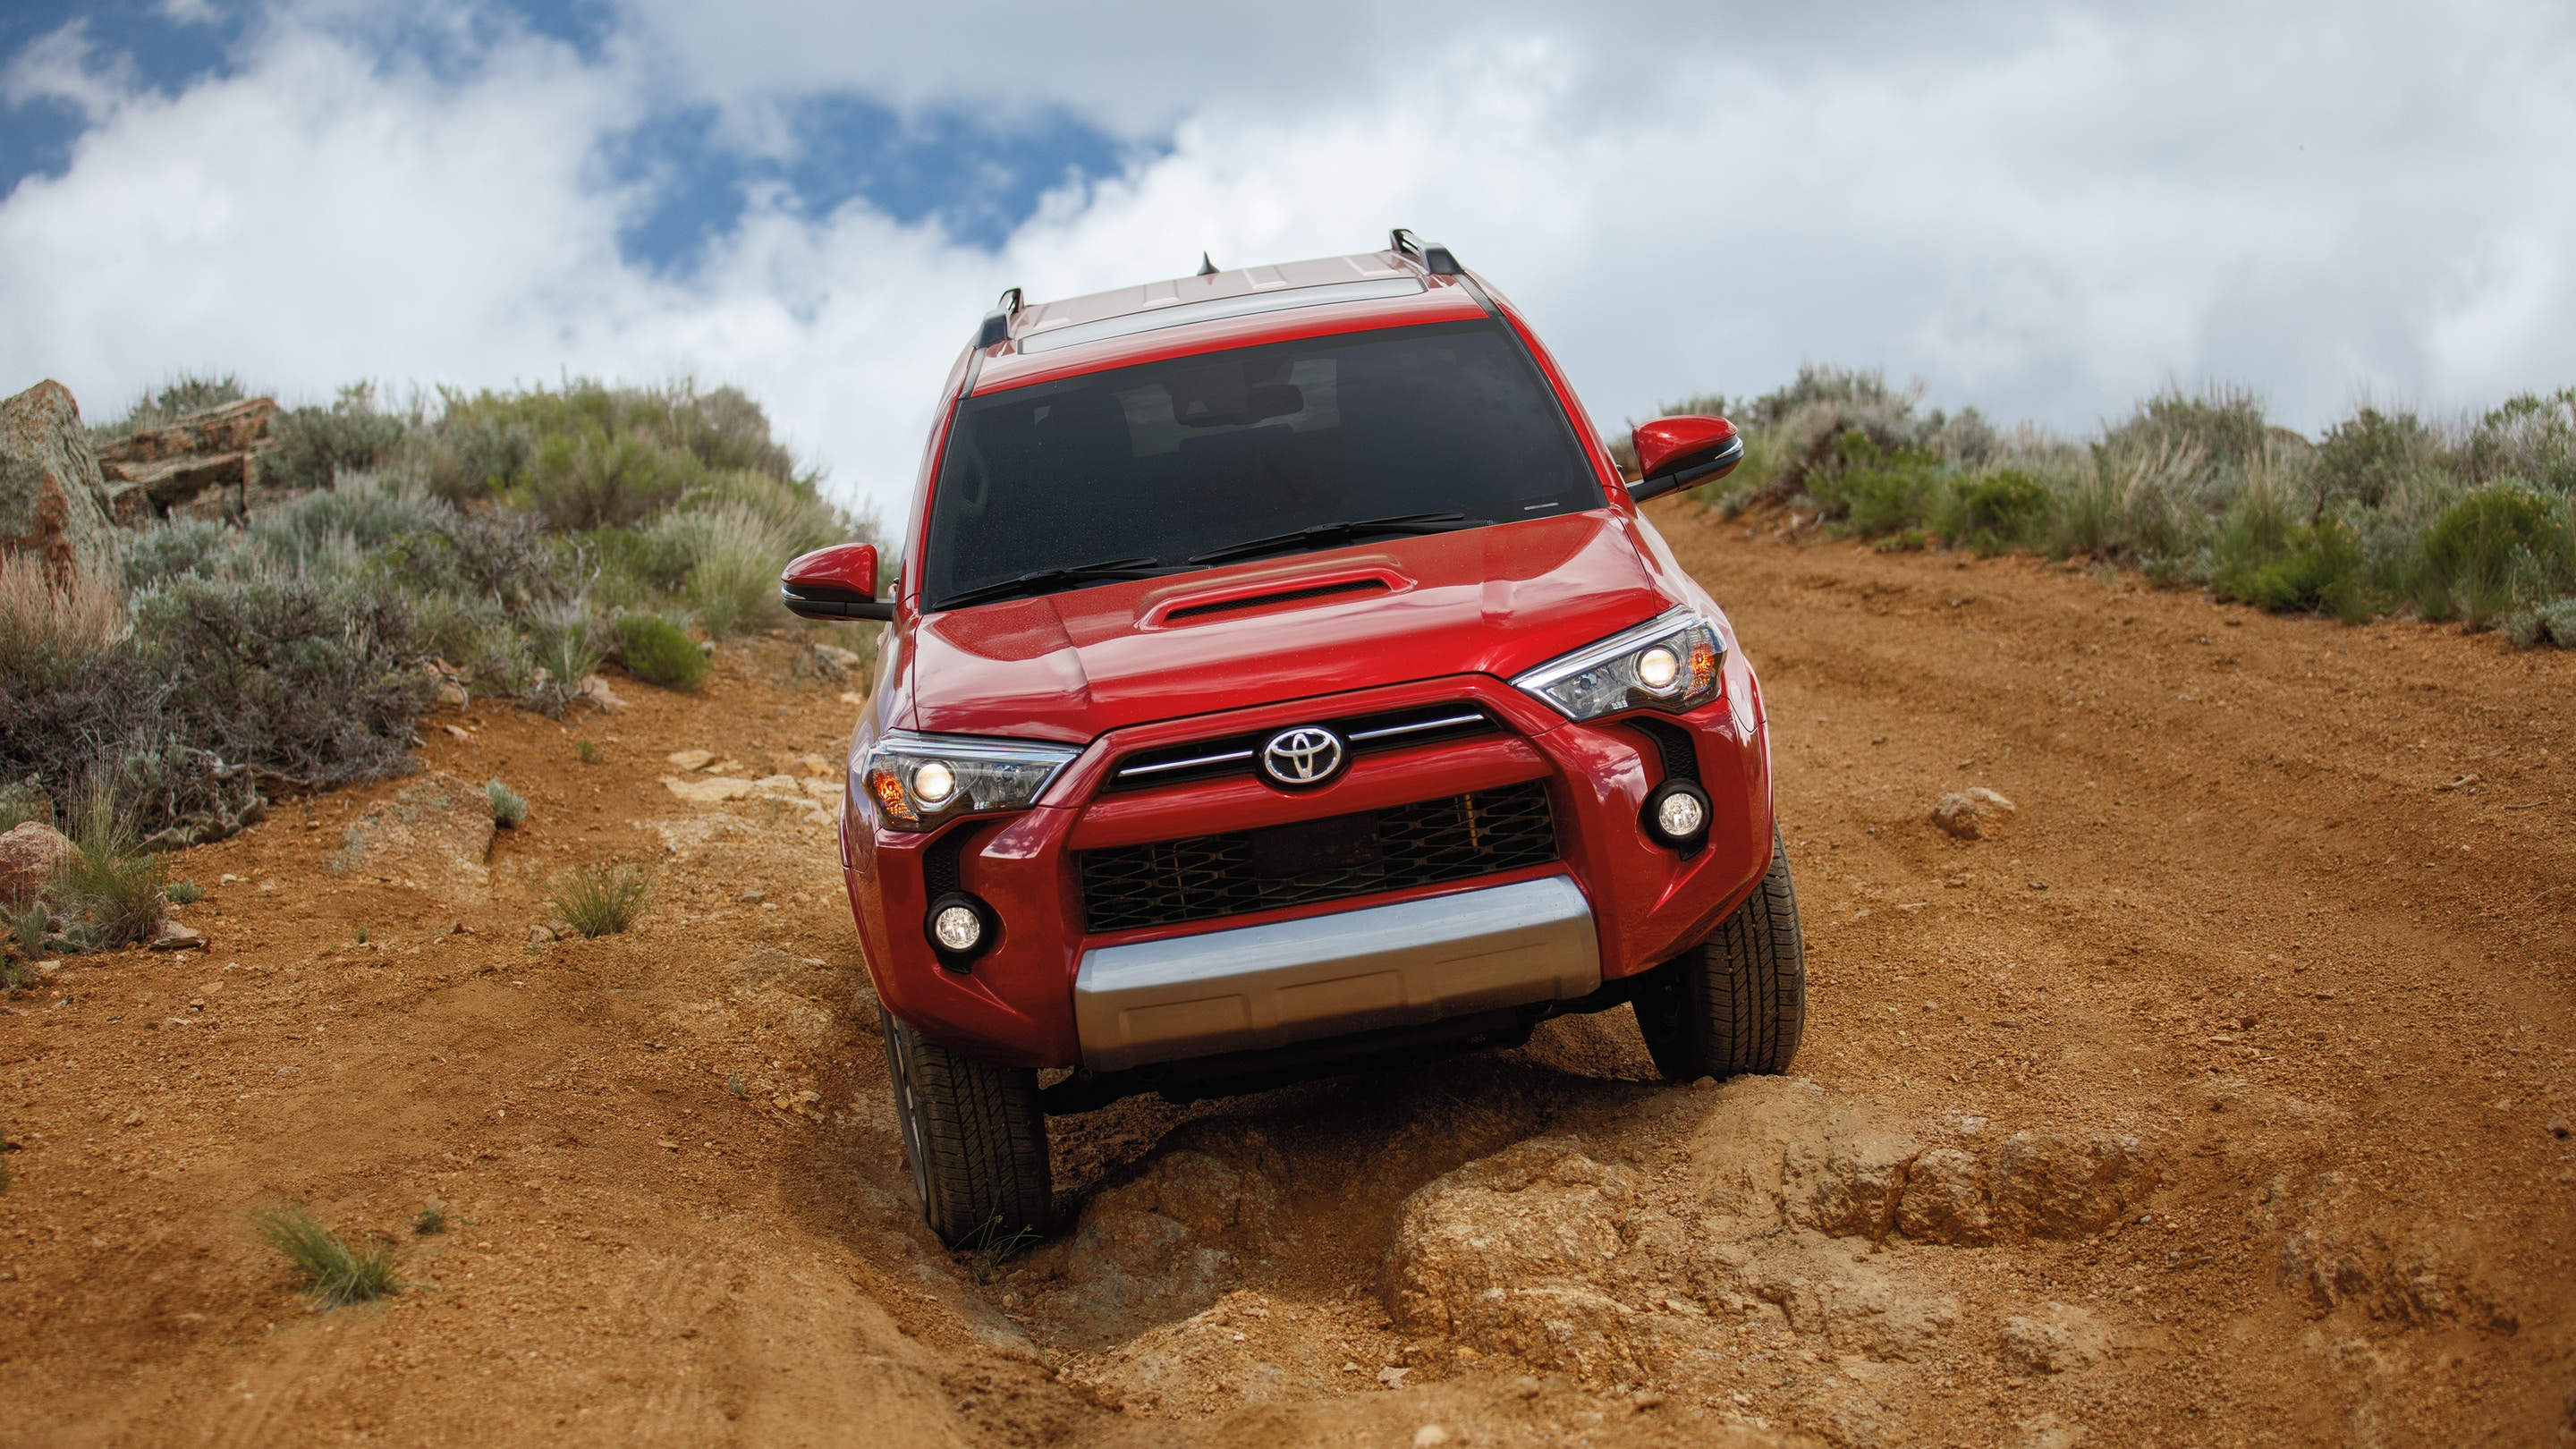 image of a Toyota 4Runner